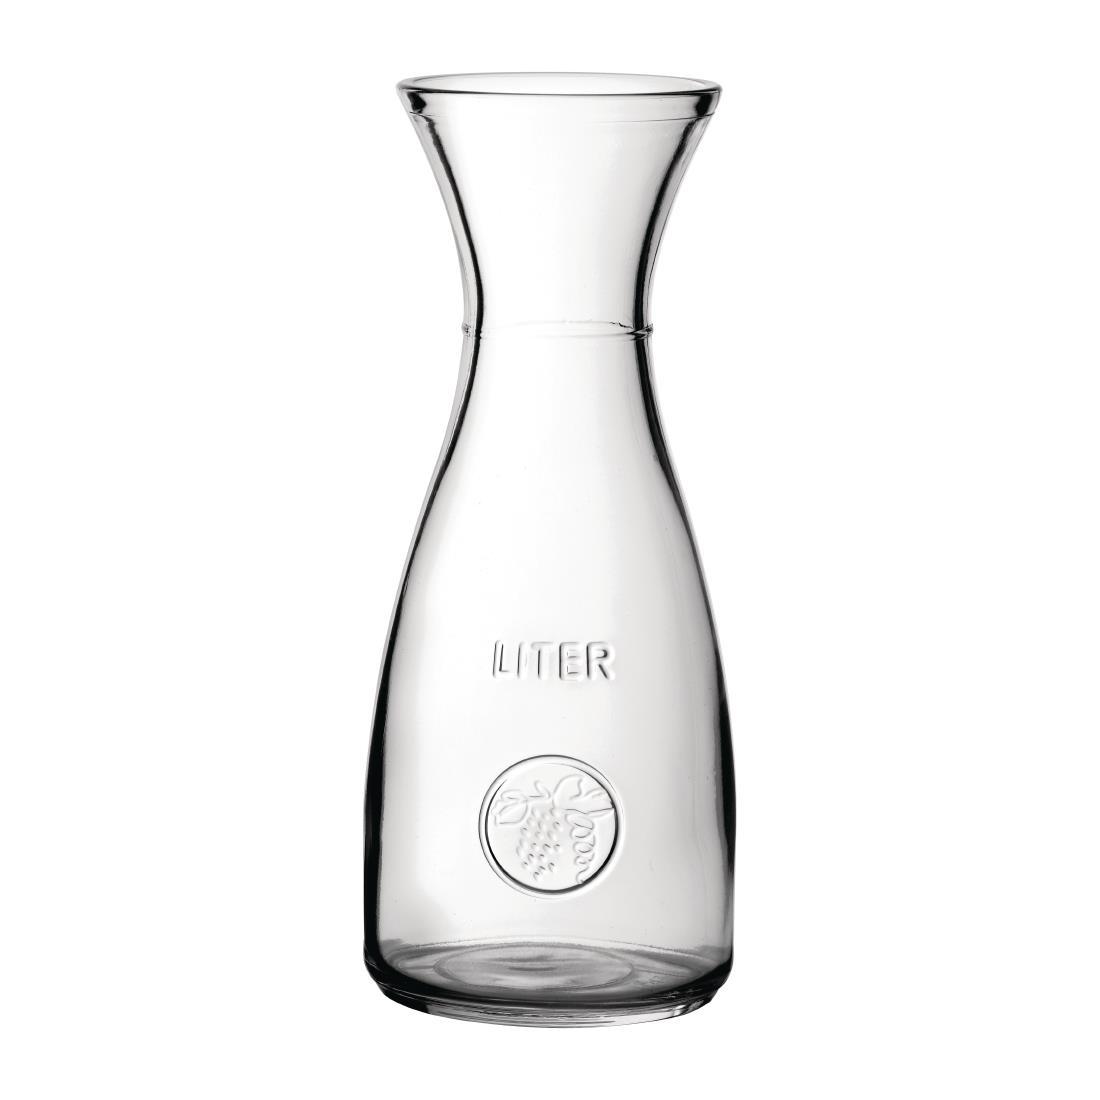 Utopia Carafes 500ml (Pack of 6) - CY409  - 1